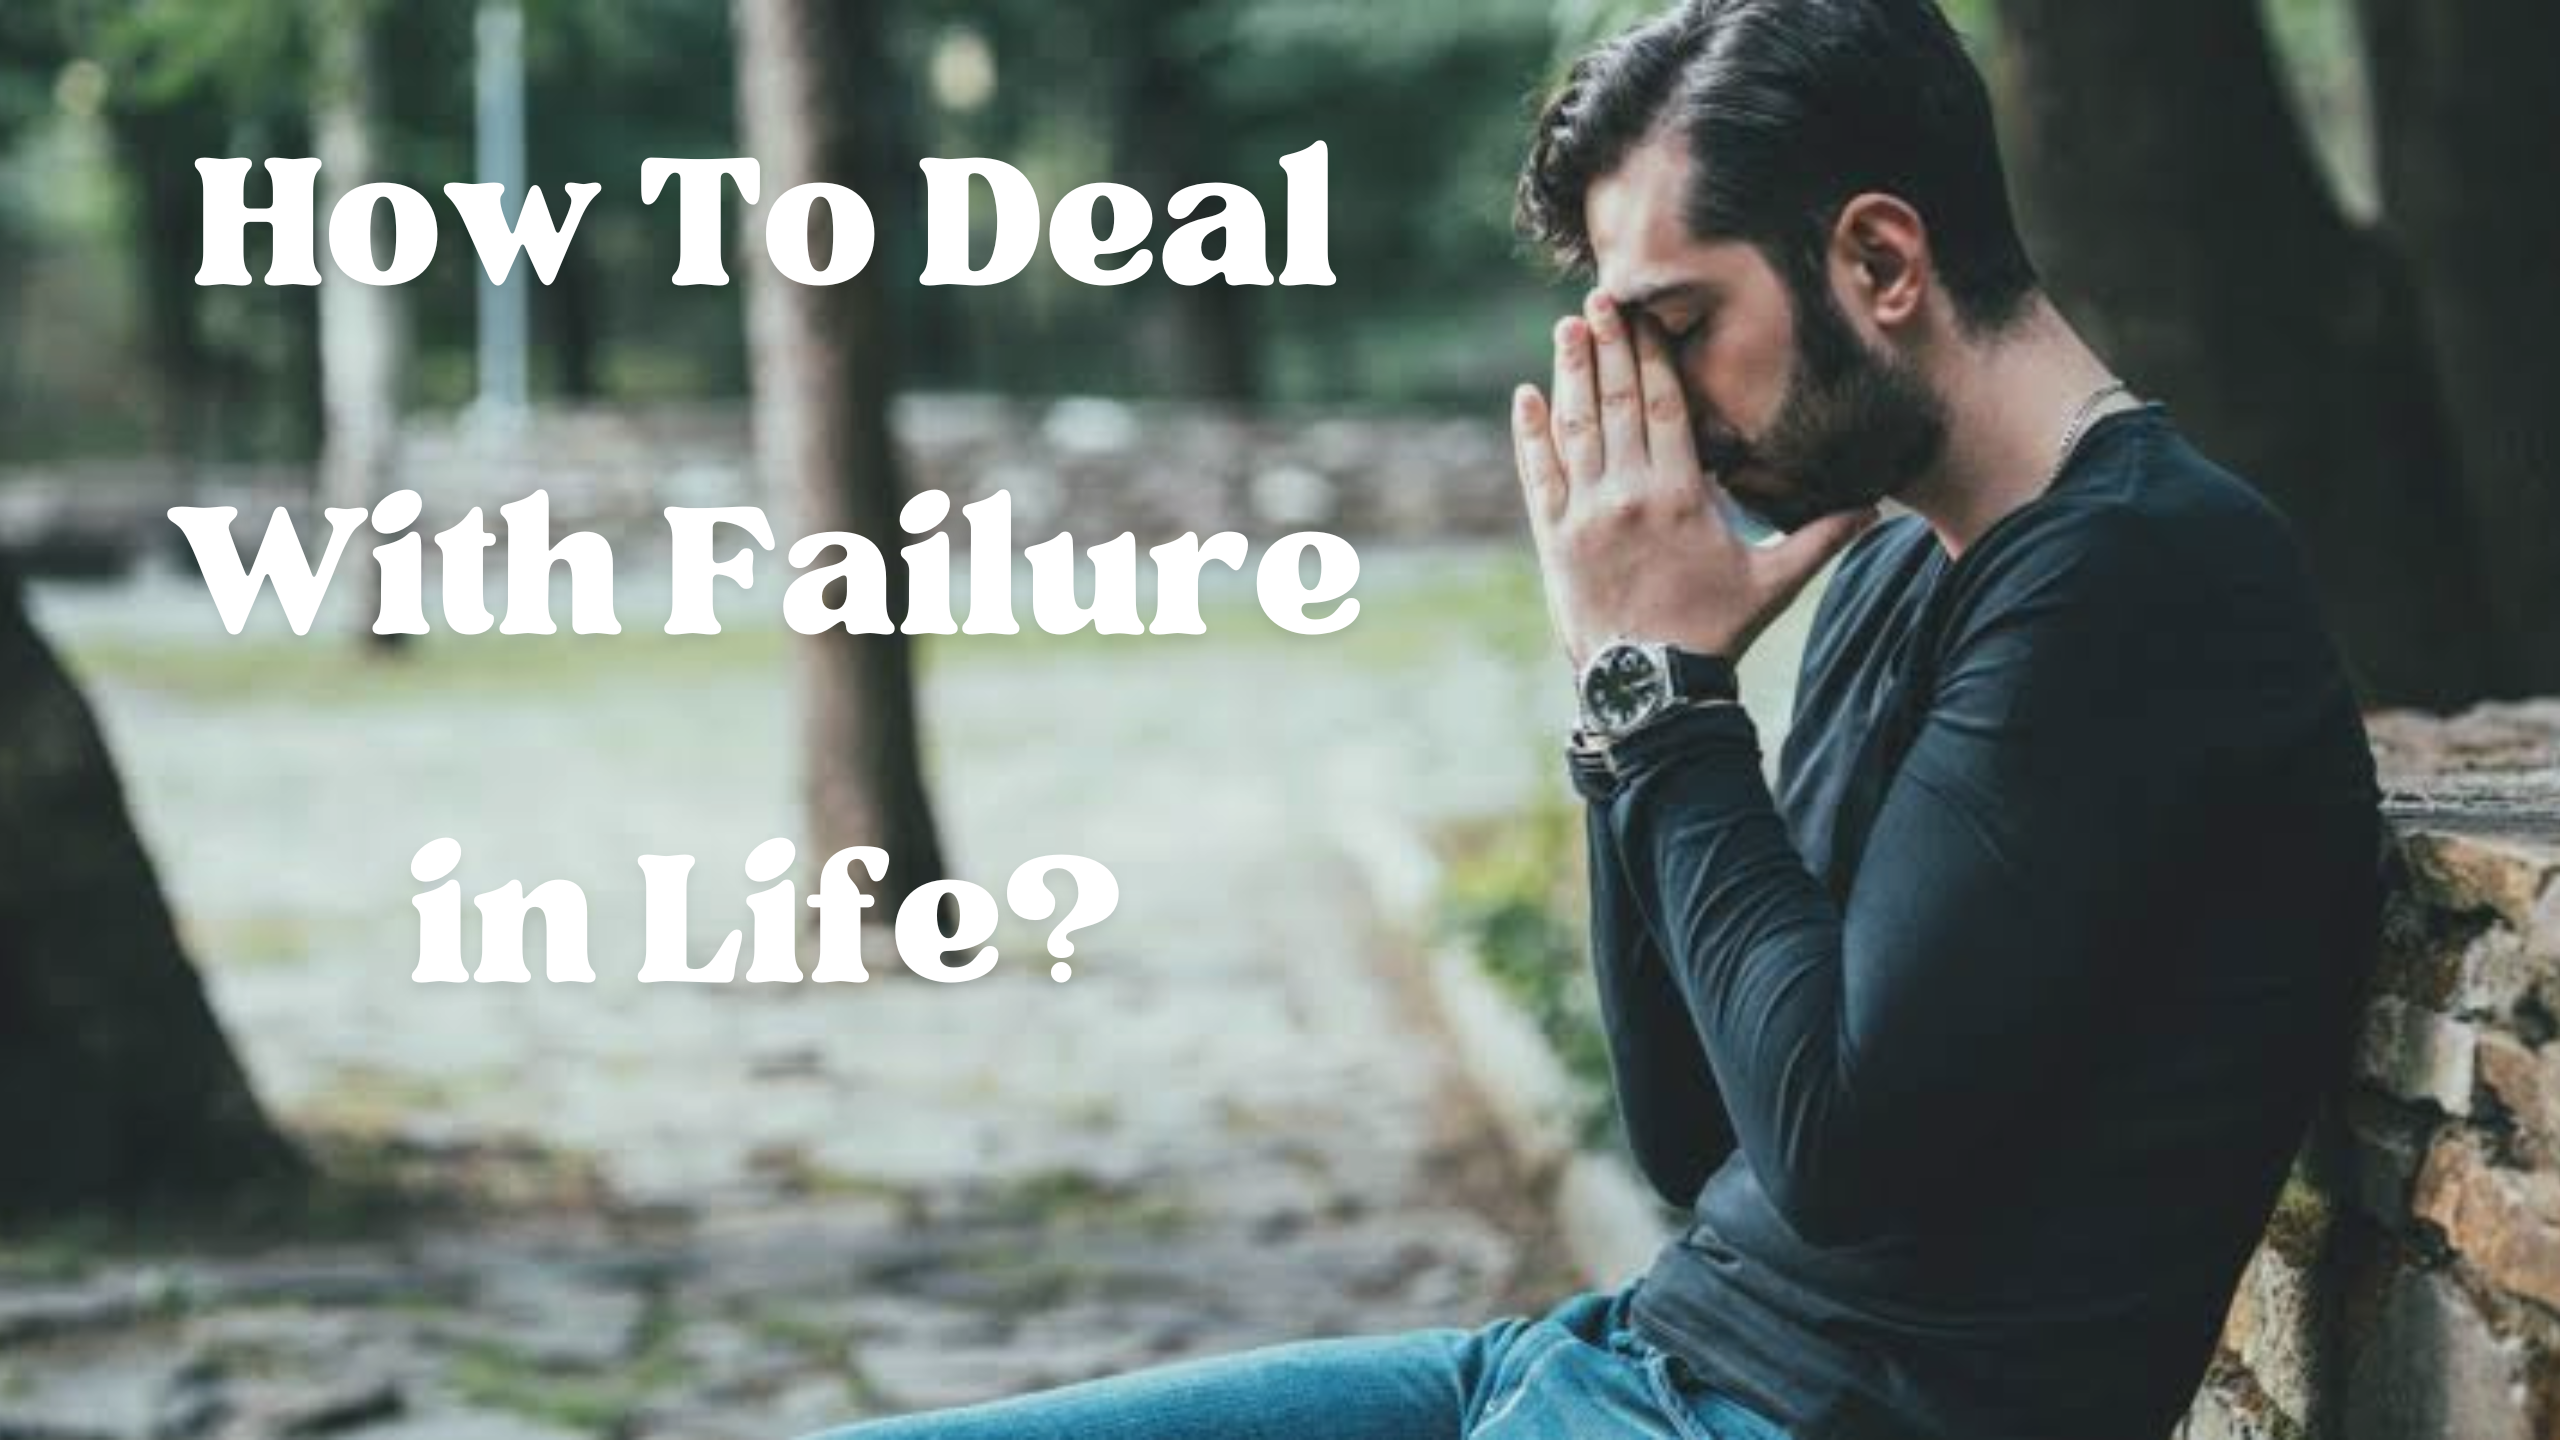 How To Deal With Failure In Life?